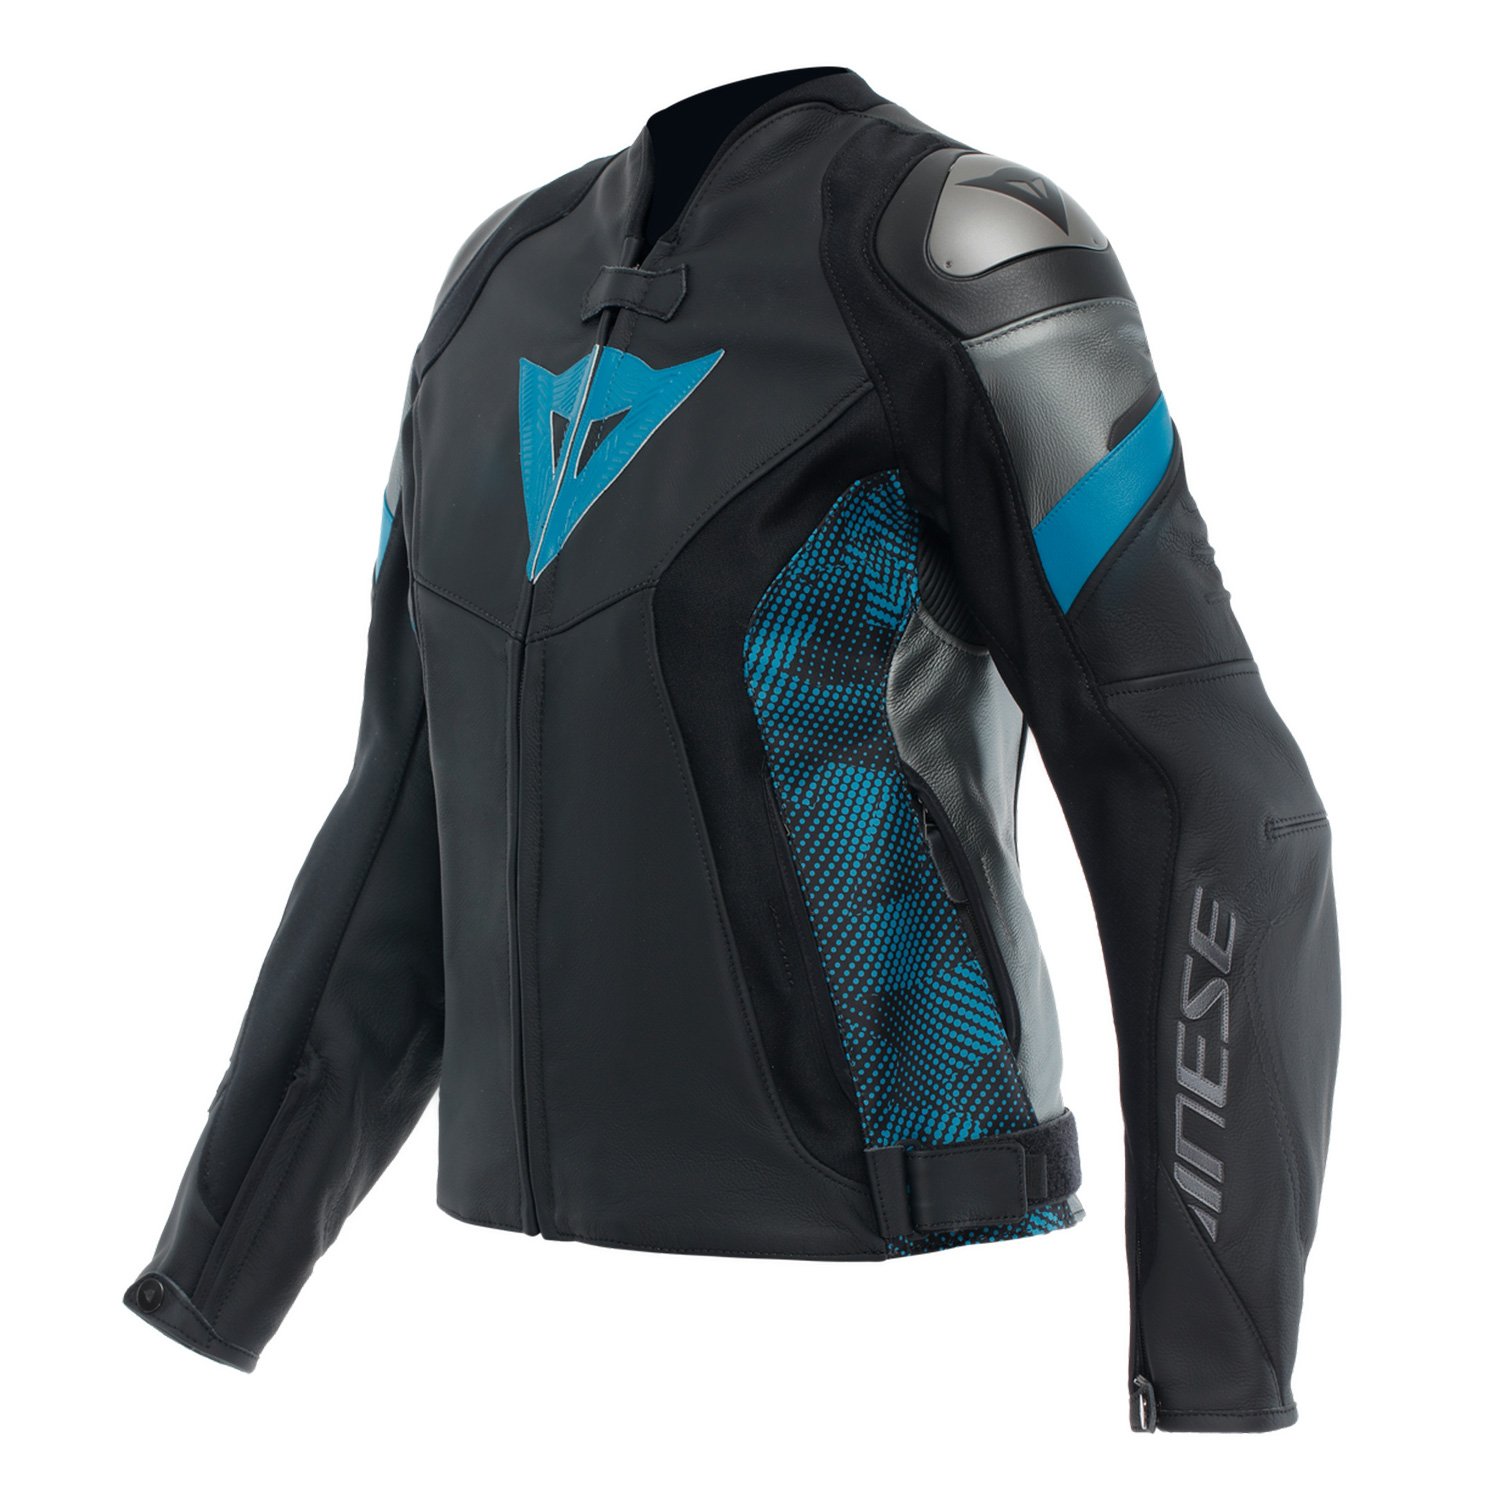 Image of Dainese Avro 5 Leather Jacket WMN Black Teal Anthracite Talla 42